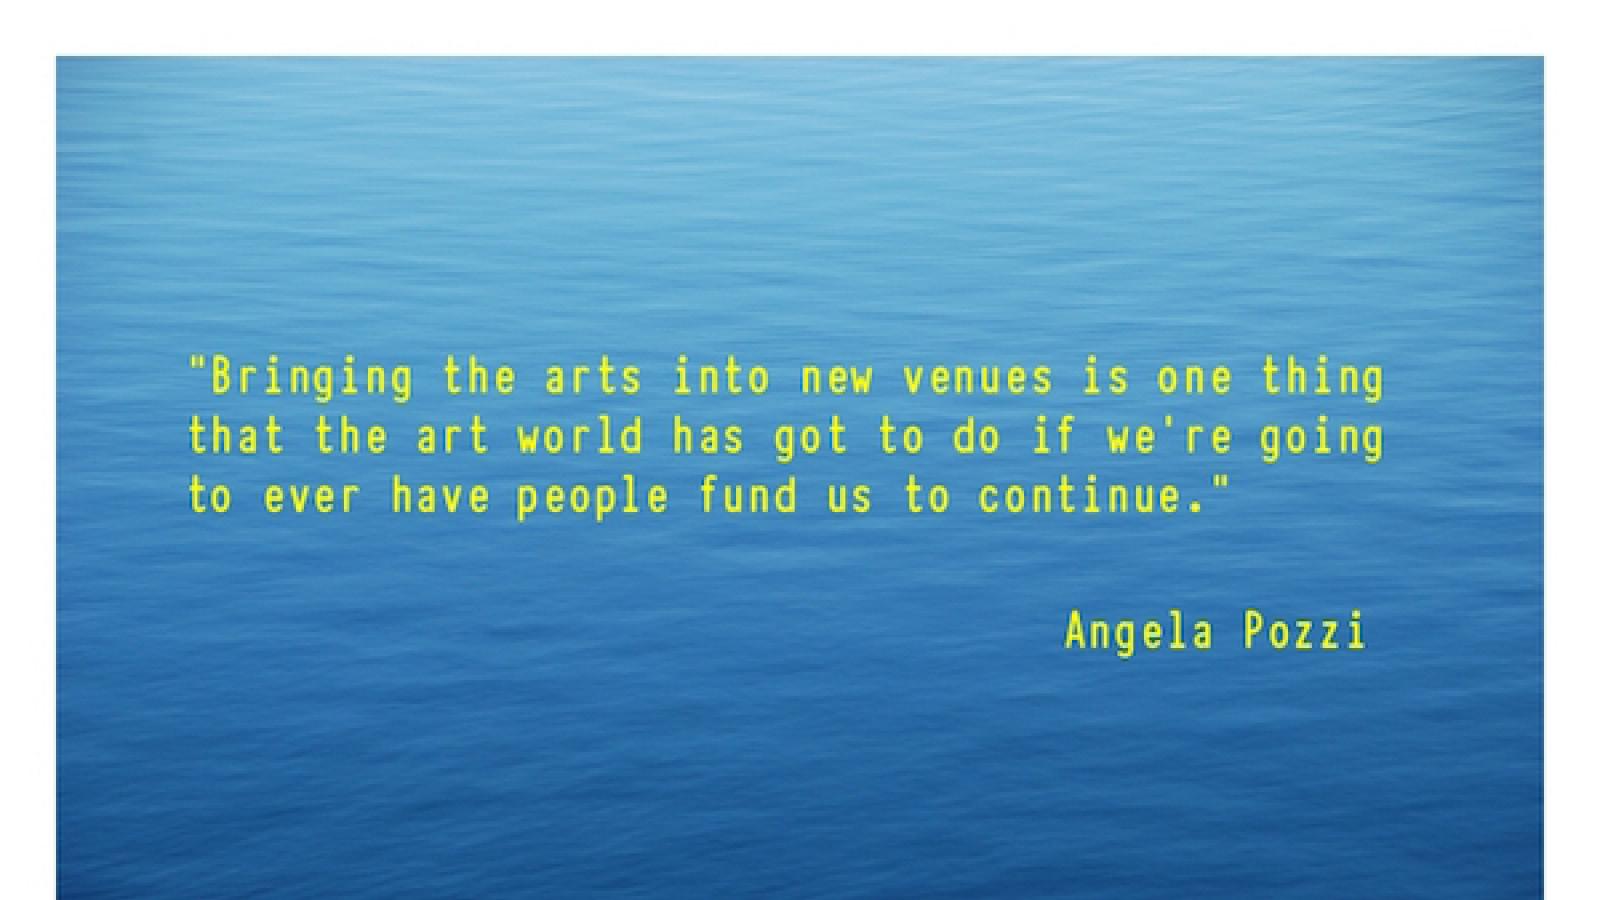 quote by Angela Pozzi Bringing the arts into new venues is 1 thing that the art world has got to do if we're going to ever have people fund us to continue